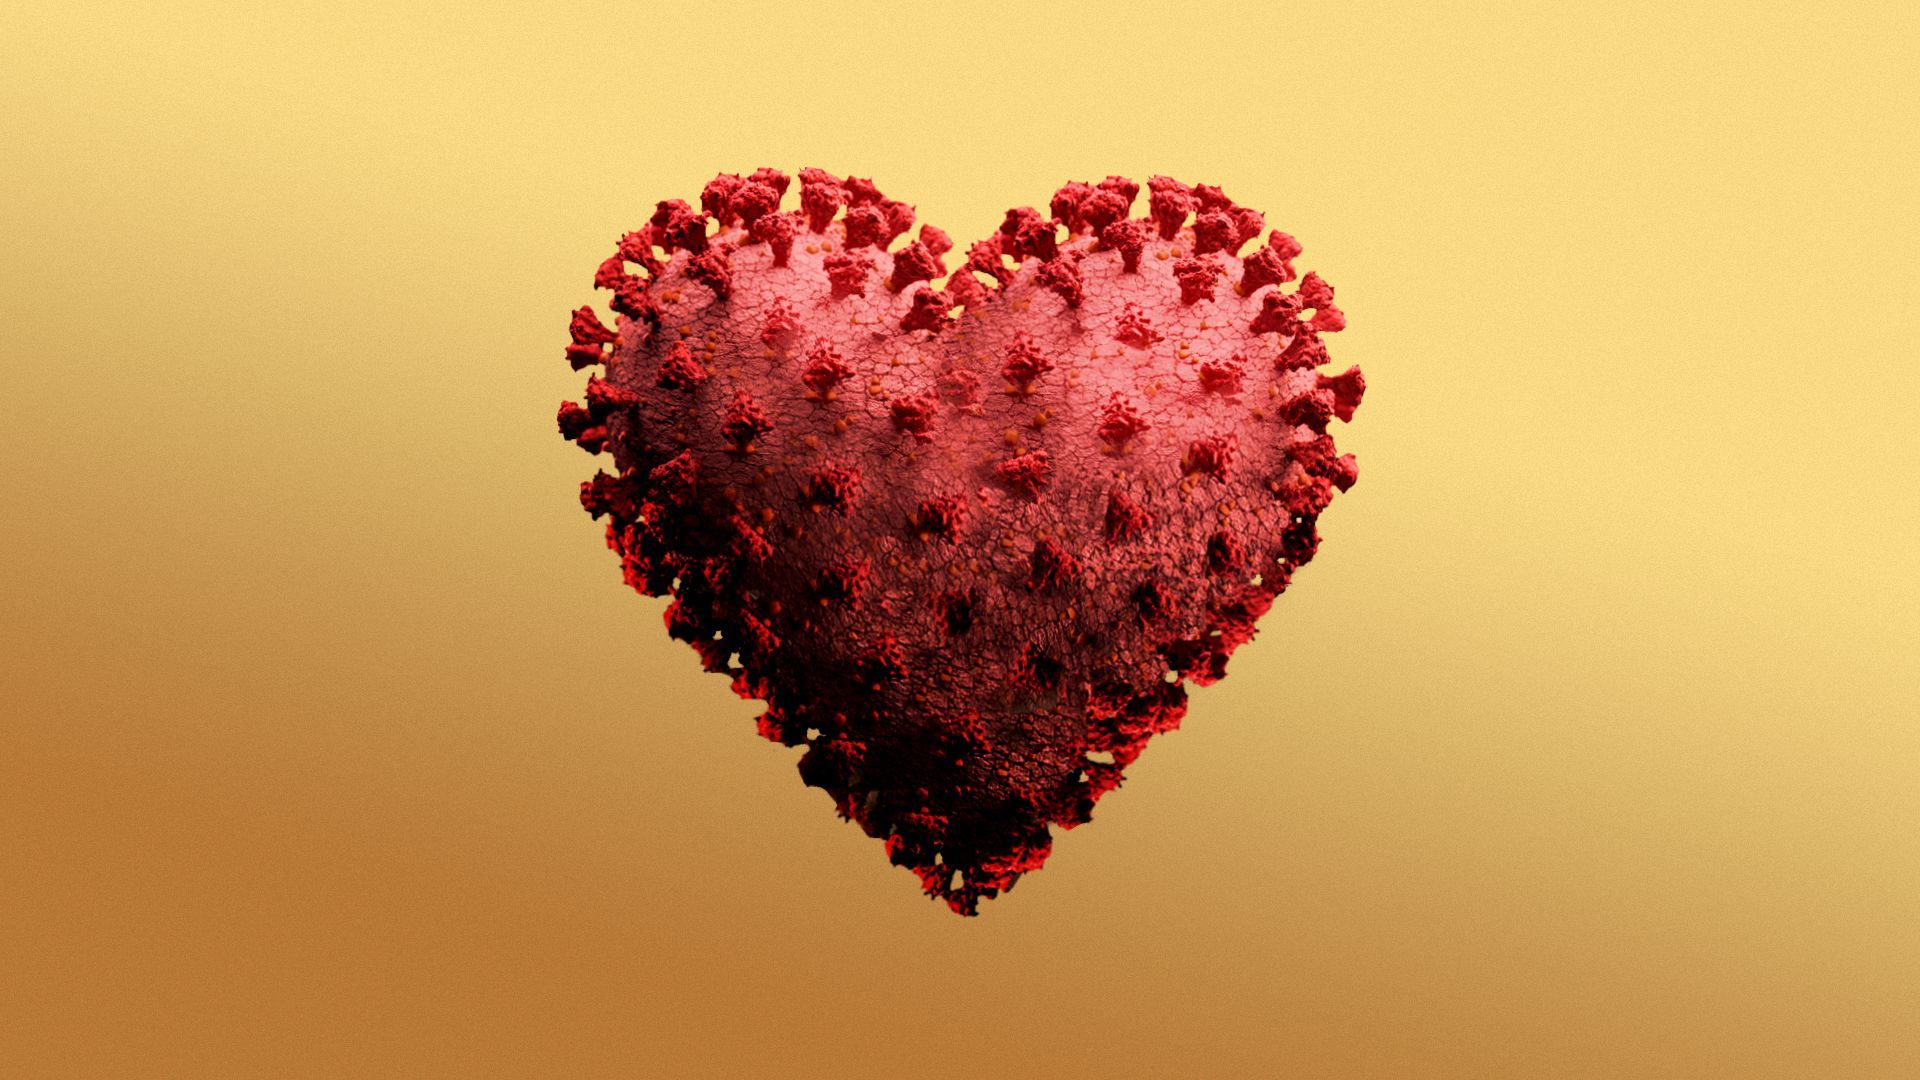 Illustration of a Coronavirus cell in the shape of a heart symbol